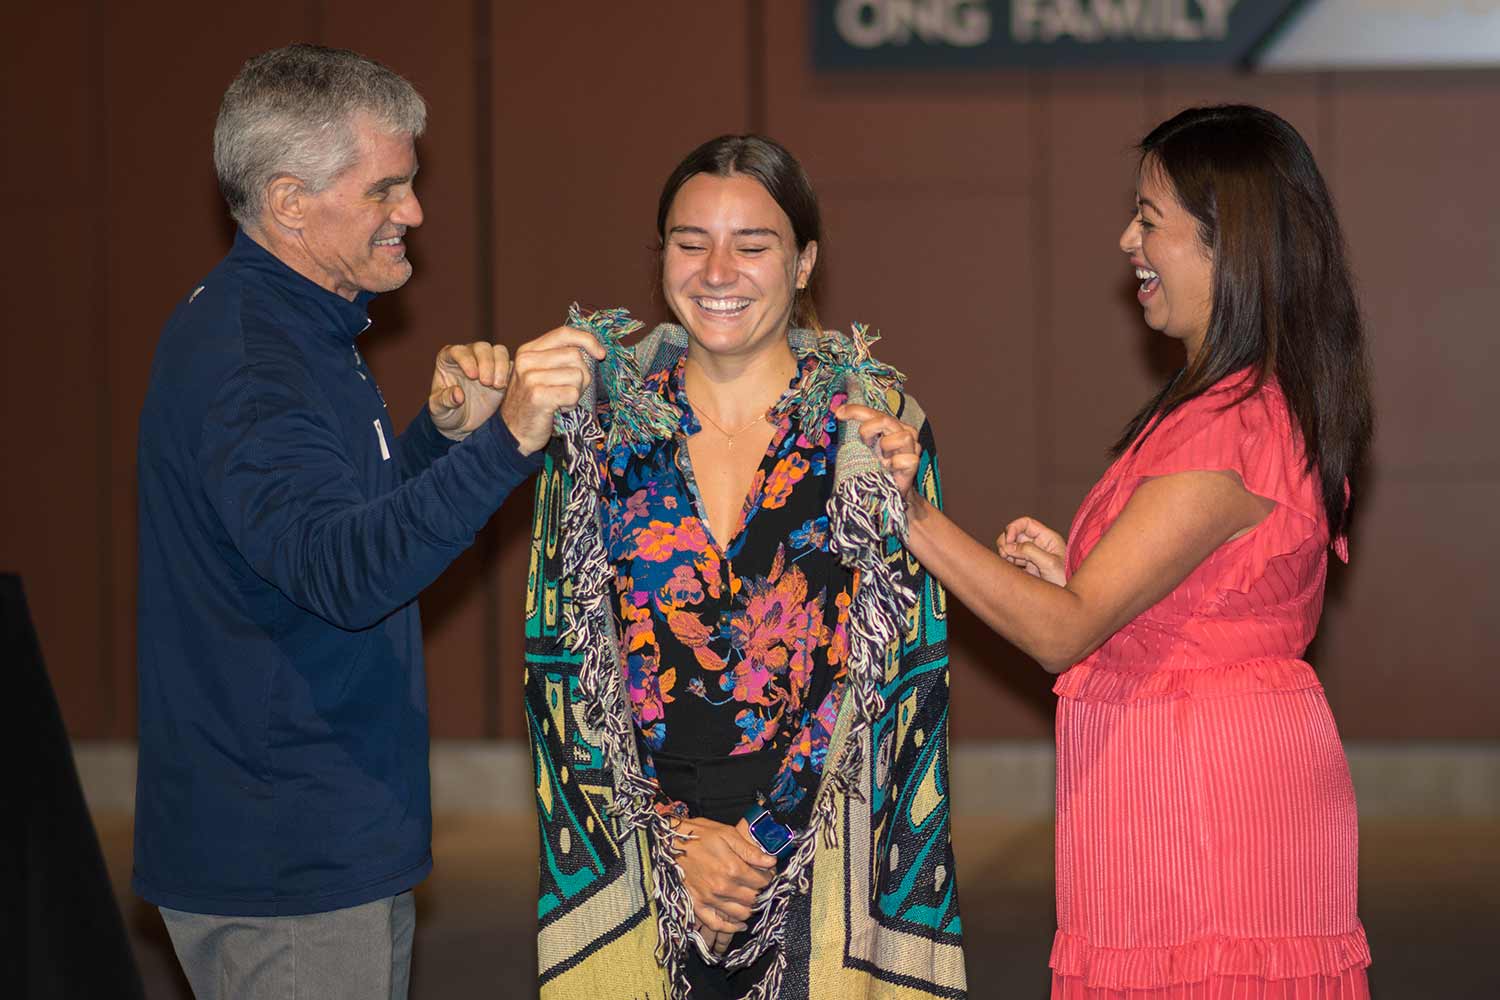 Native American faculty members wrapped second-year medical student Brianna Irons in her Blanket of Knowledge.